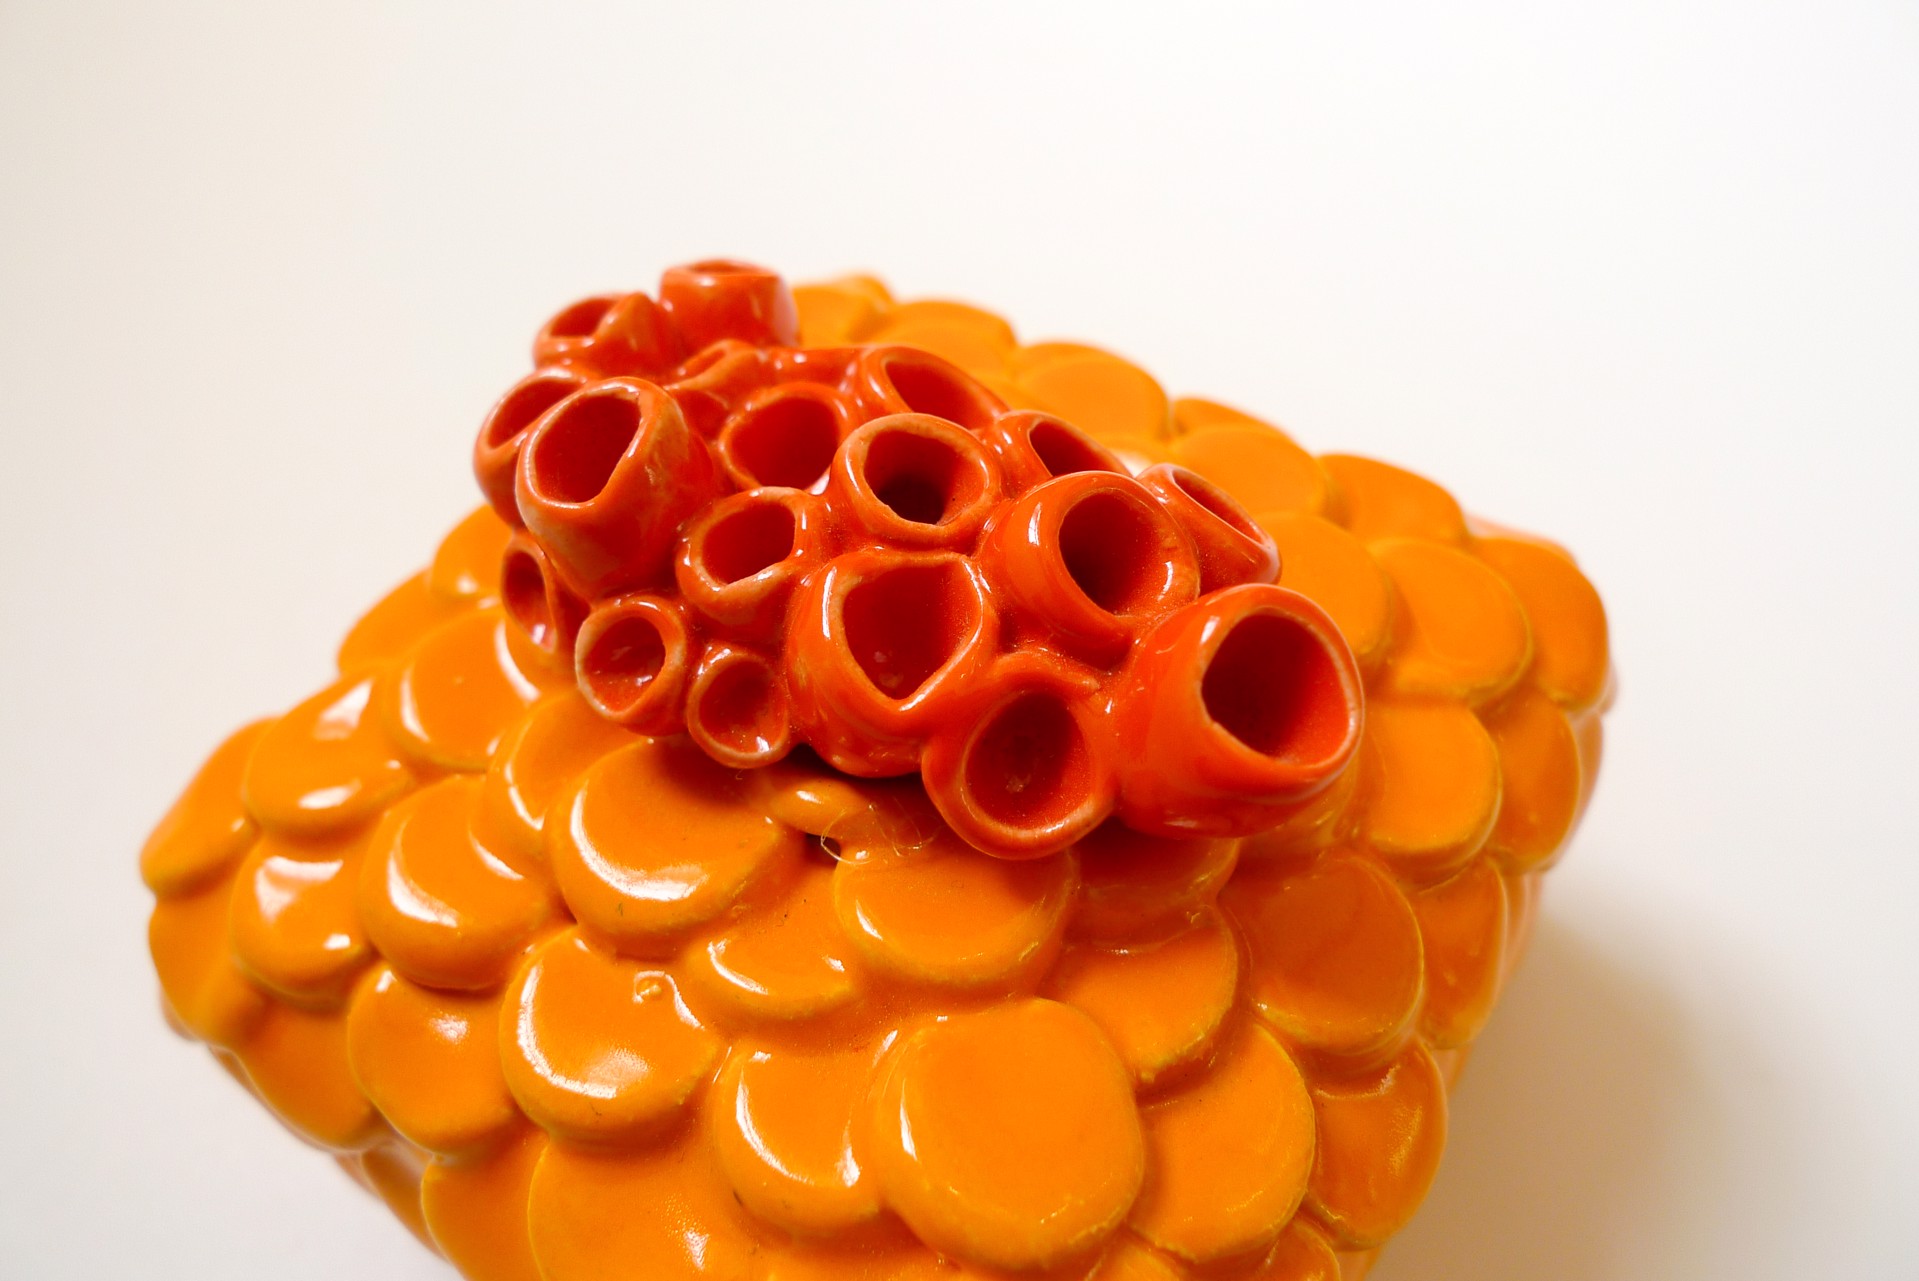 Orange Disc and Barnacles Wall Box by Rachelle Miller